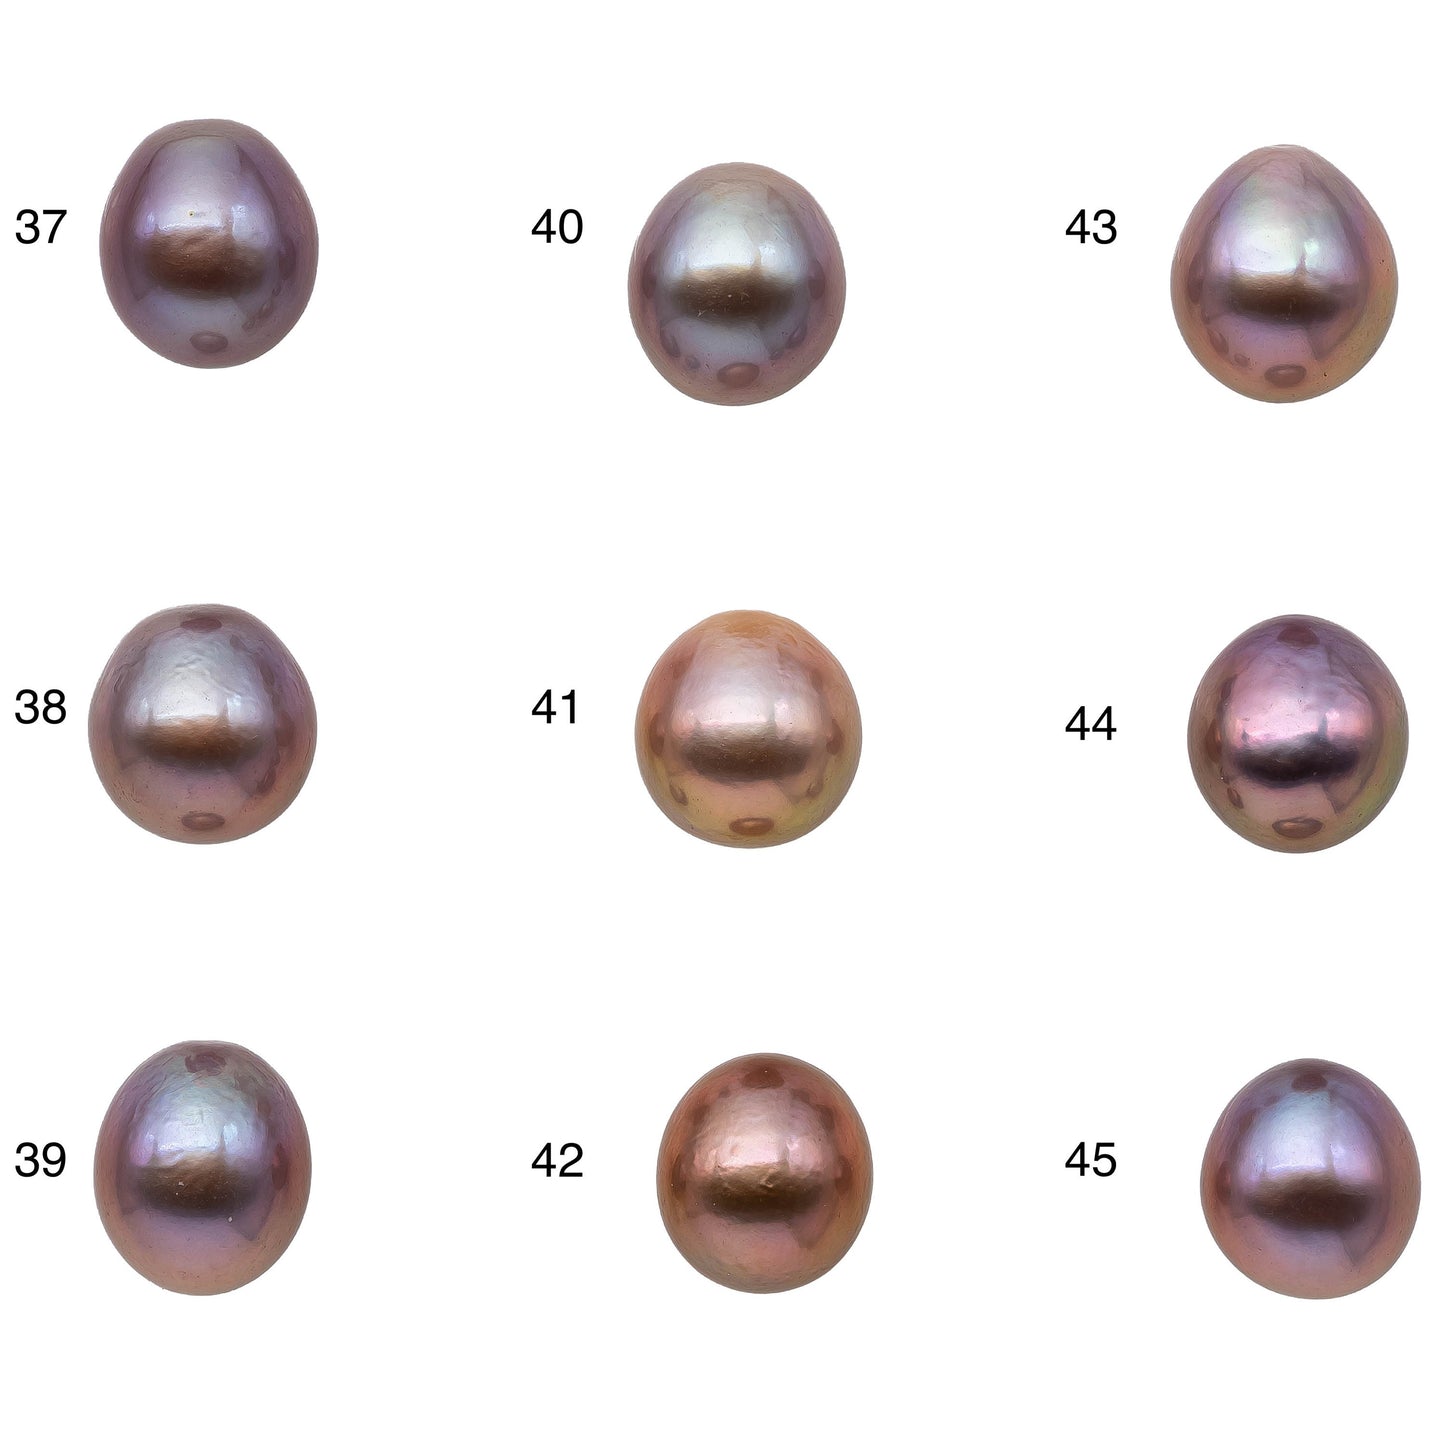 11-12mm Loose Edison Pearl Single Piece Natural Color Freshwater Teardrops Undrilled with Very High Luster for Jewelry Making, SKU # 1165EP